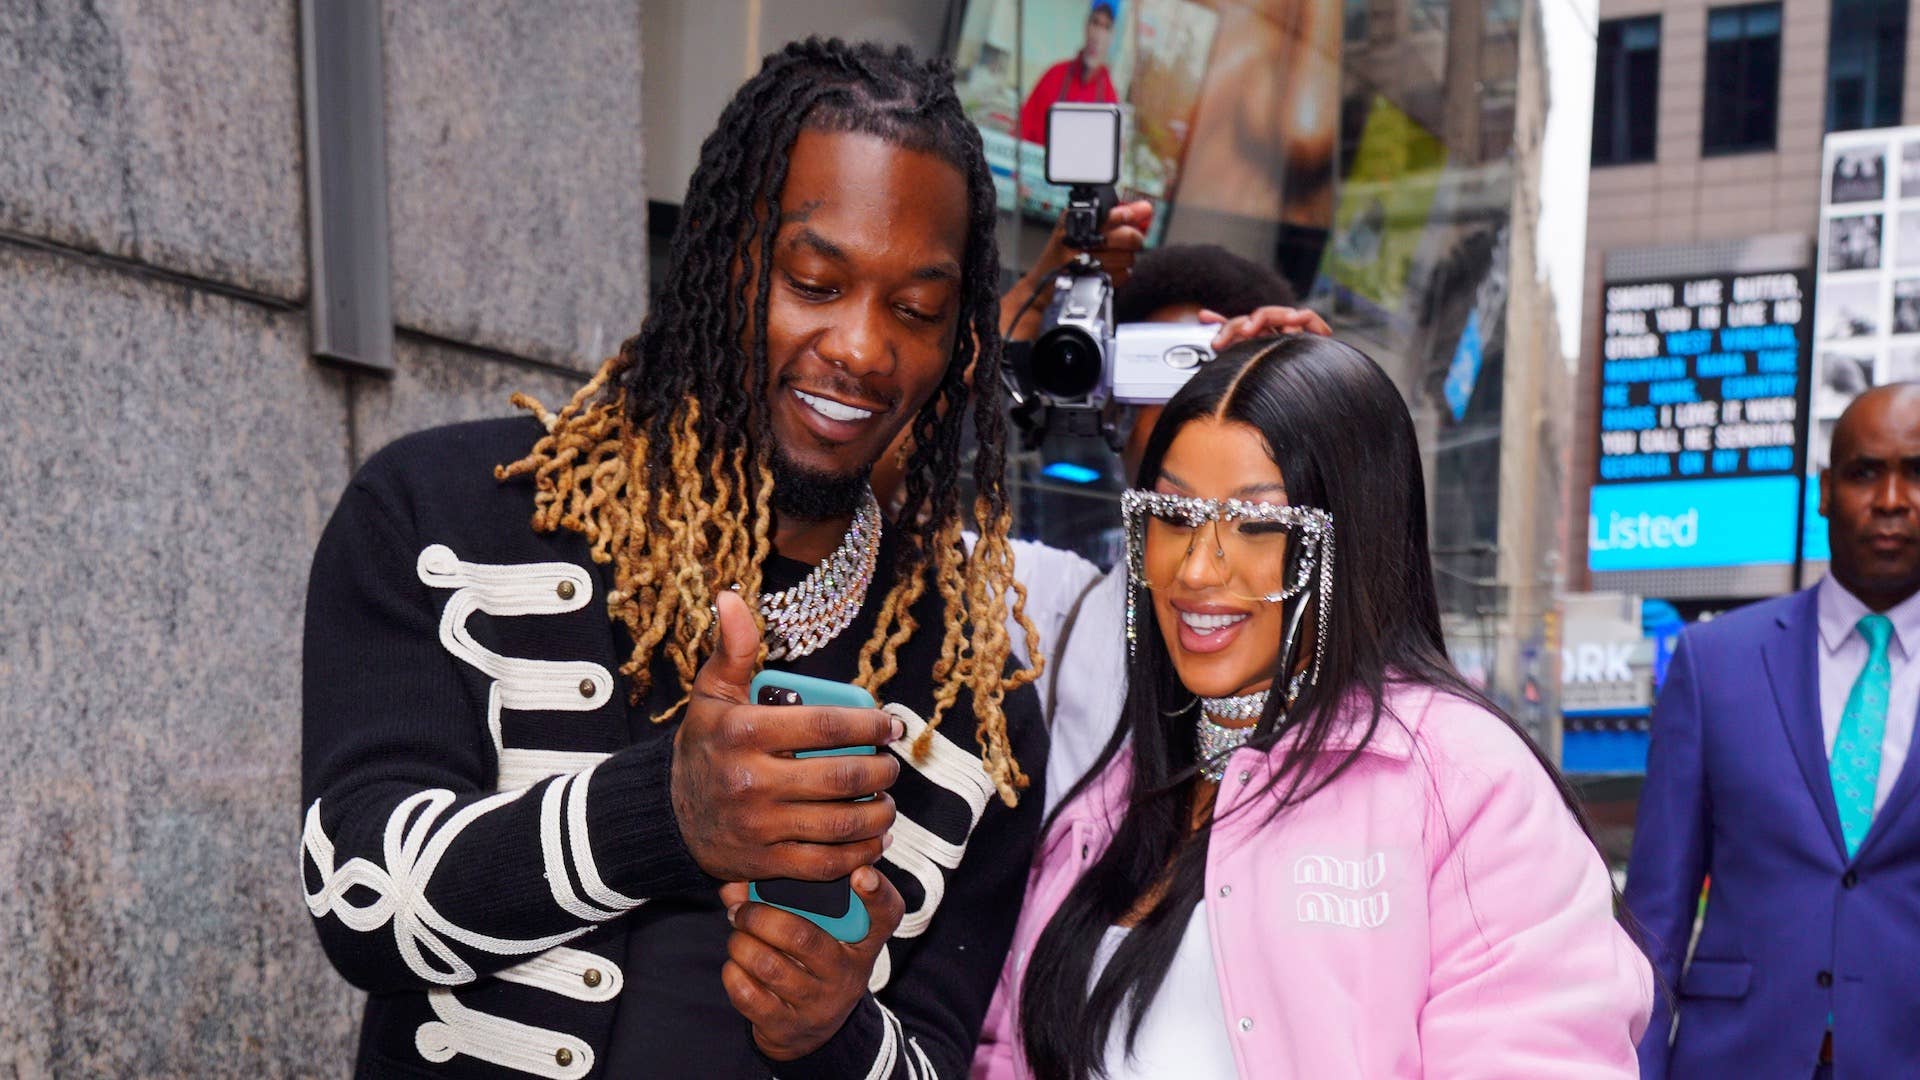 Cardi B and Offset Share First Photo of Baby Son's Face and Reveal His Name